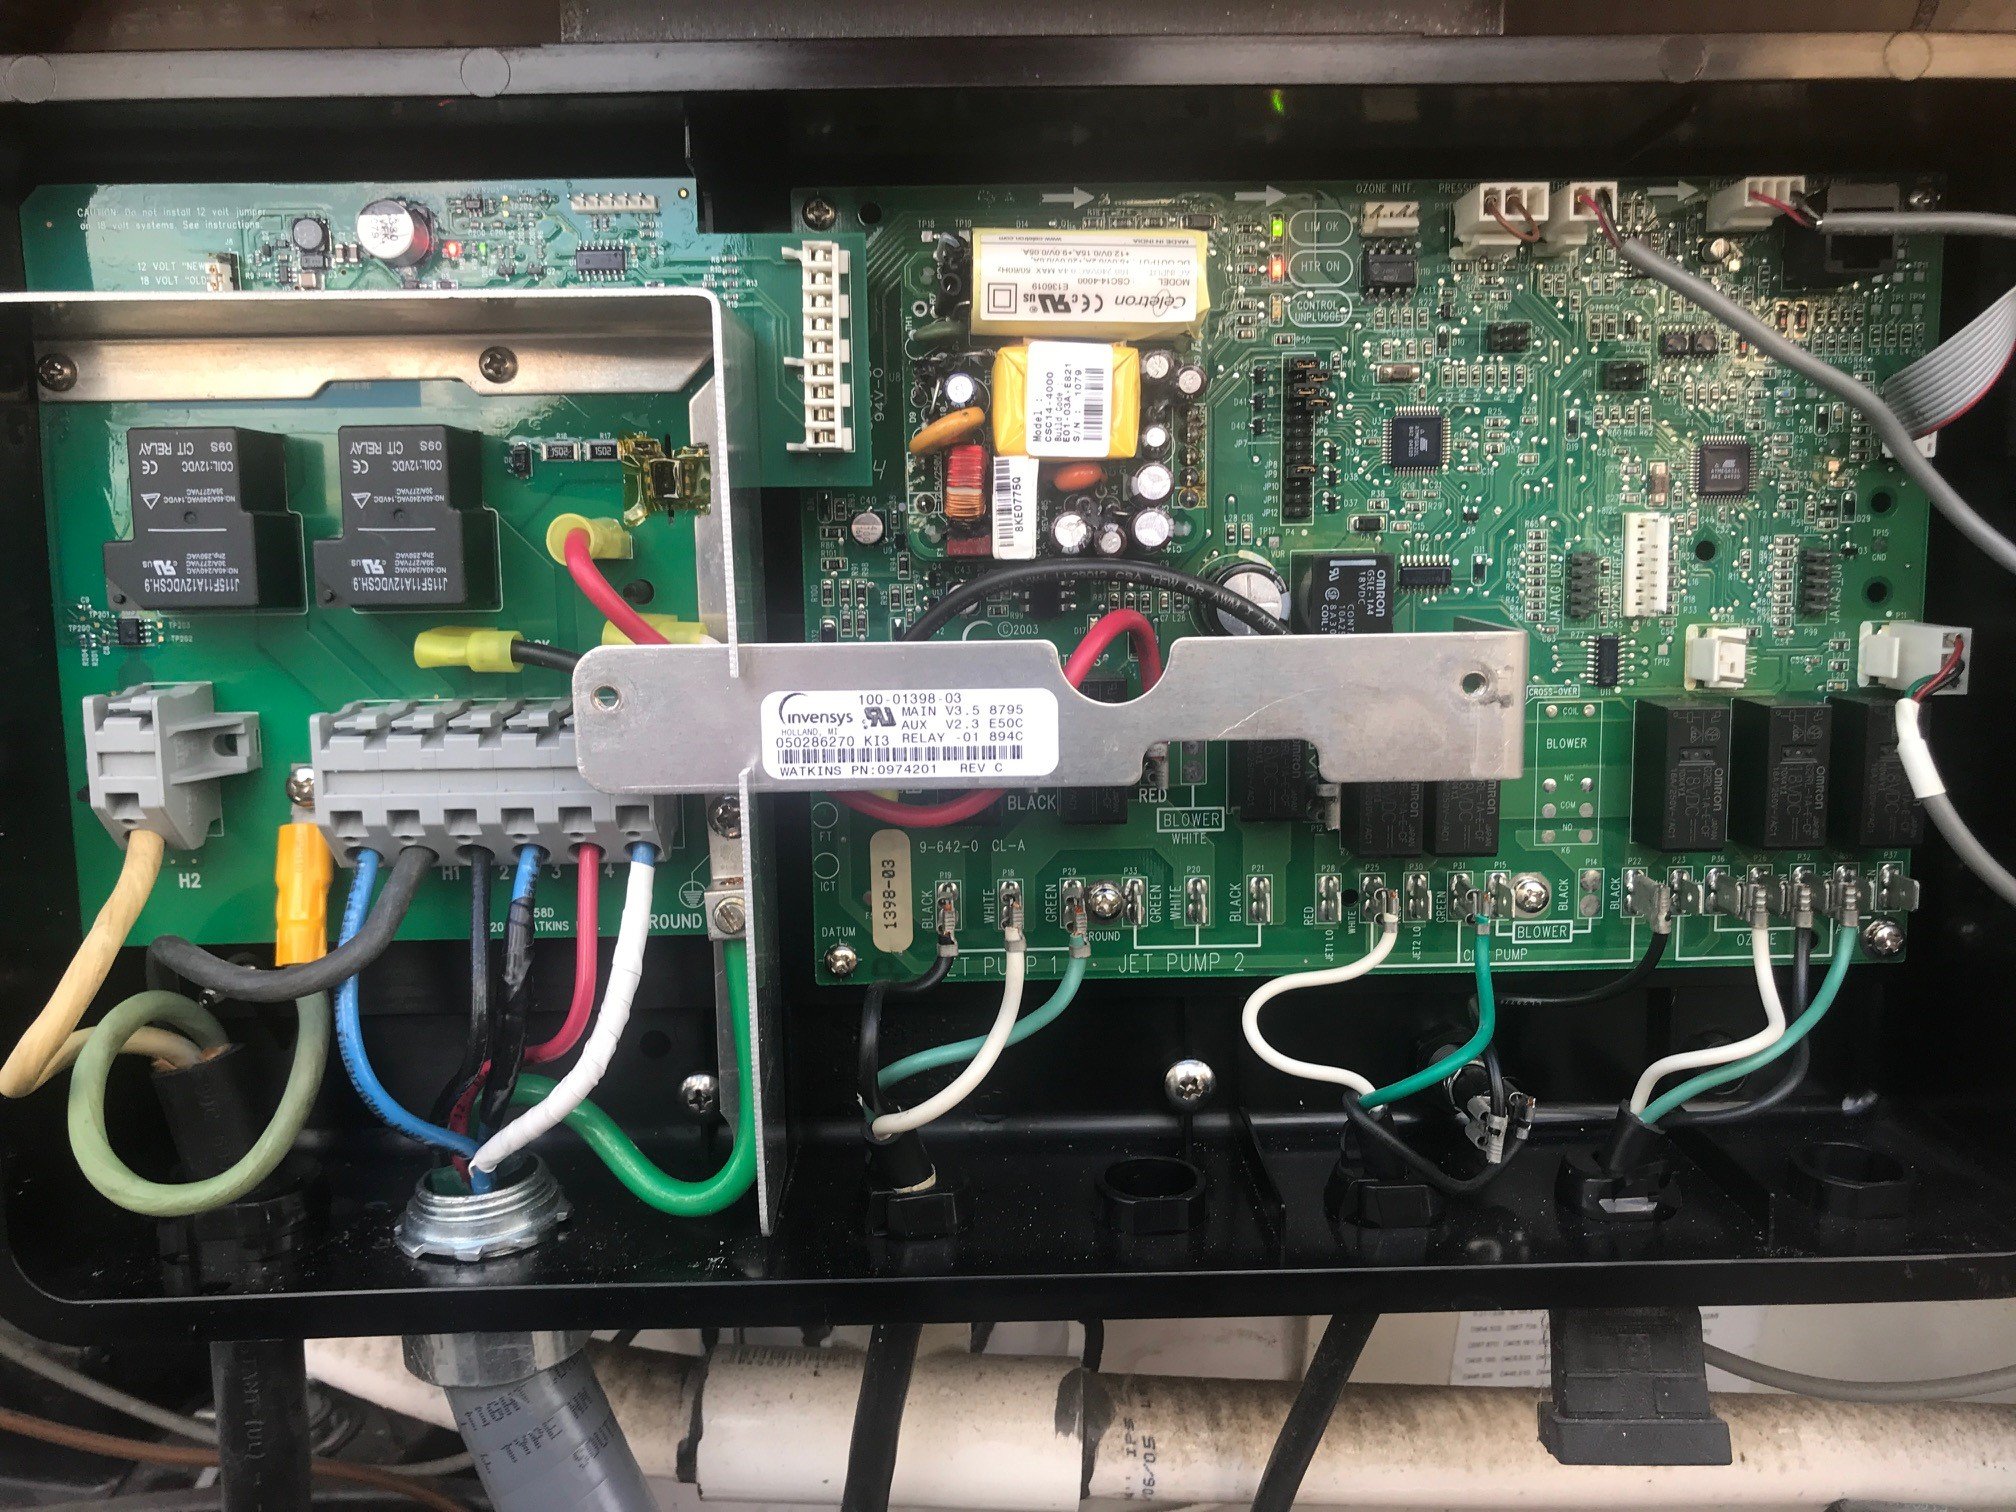 Tiger River Bangal Model MM No Heater - Blown Relay - Portable Hot Tubs &  Spas - Pool and Spa Forum  Iq 2020 Spa Control System Wiring Diagram    Pool Spa Forum